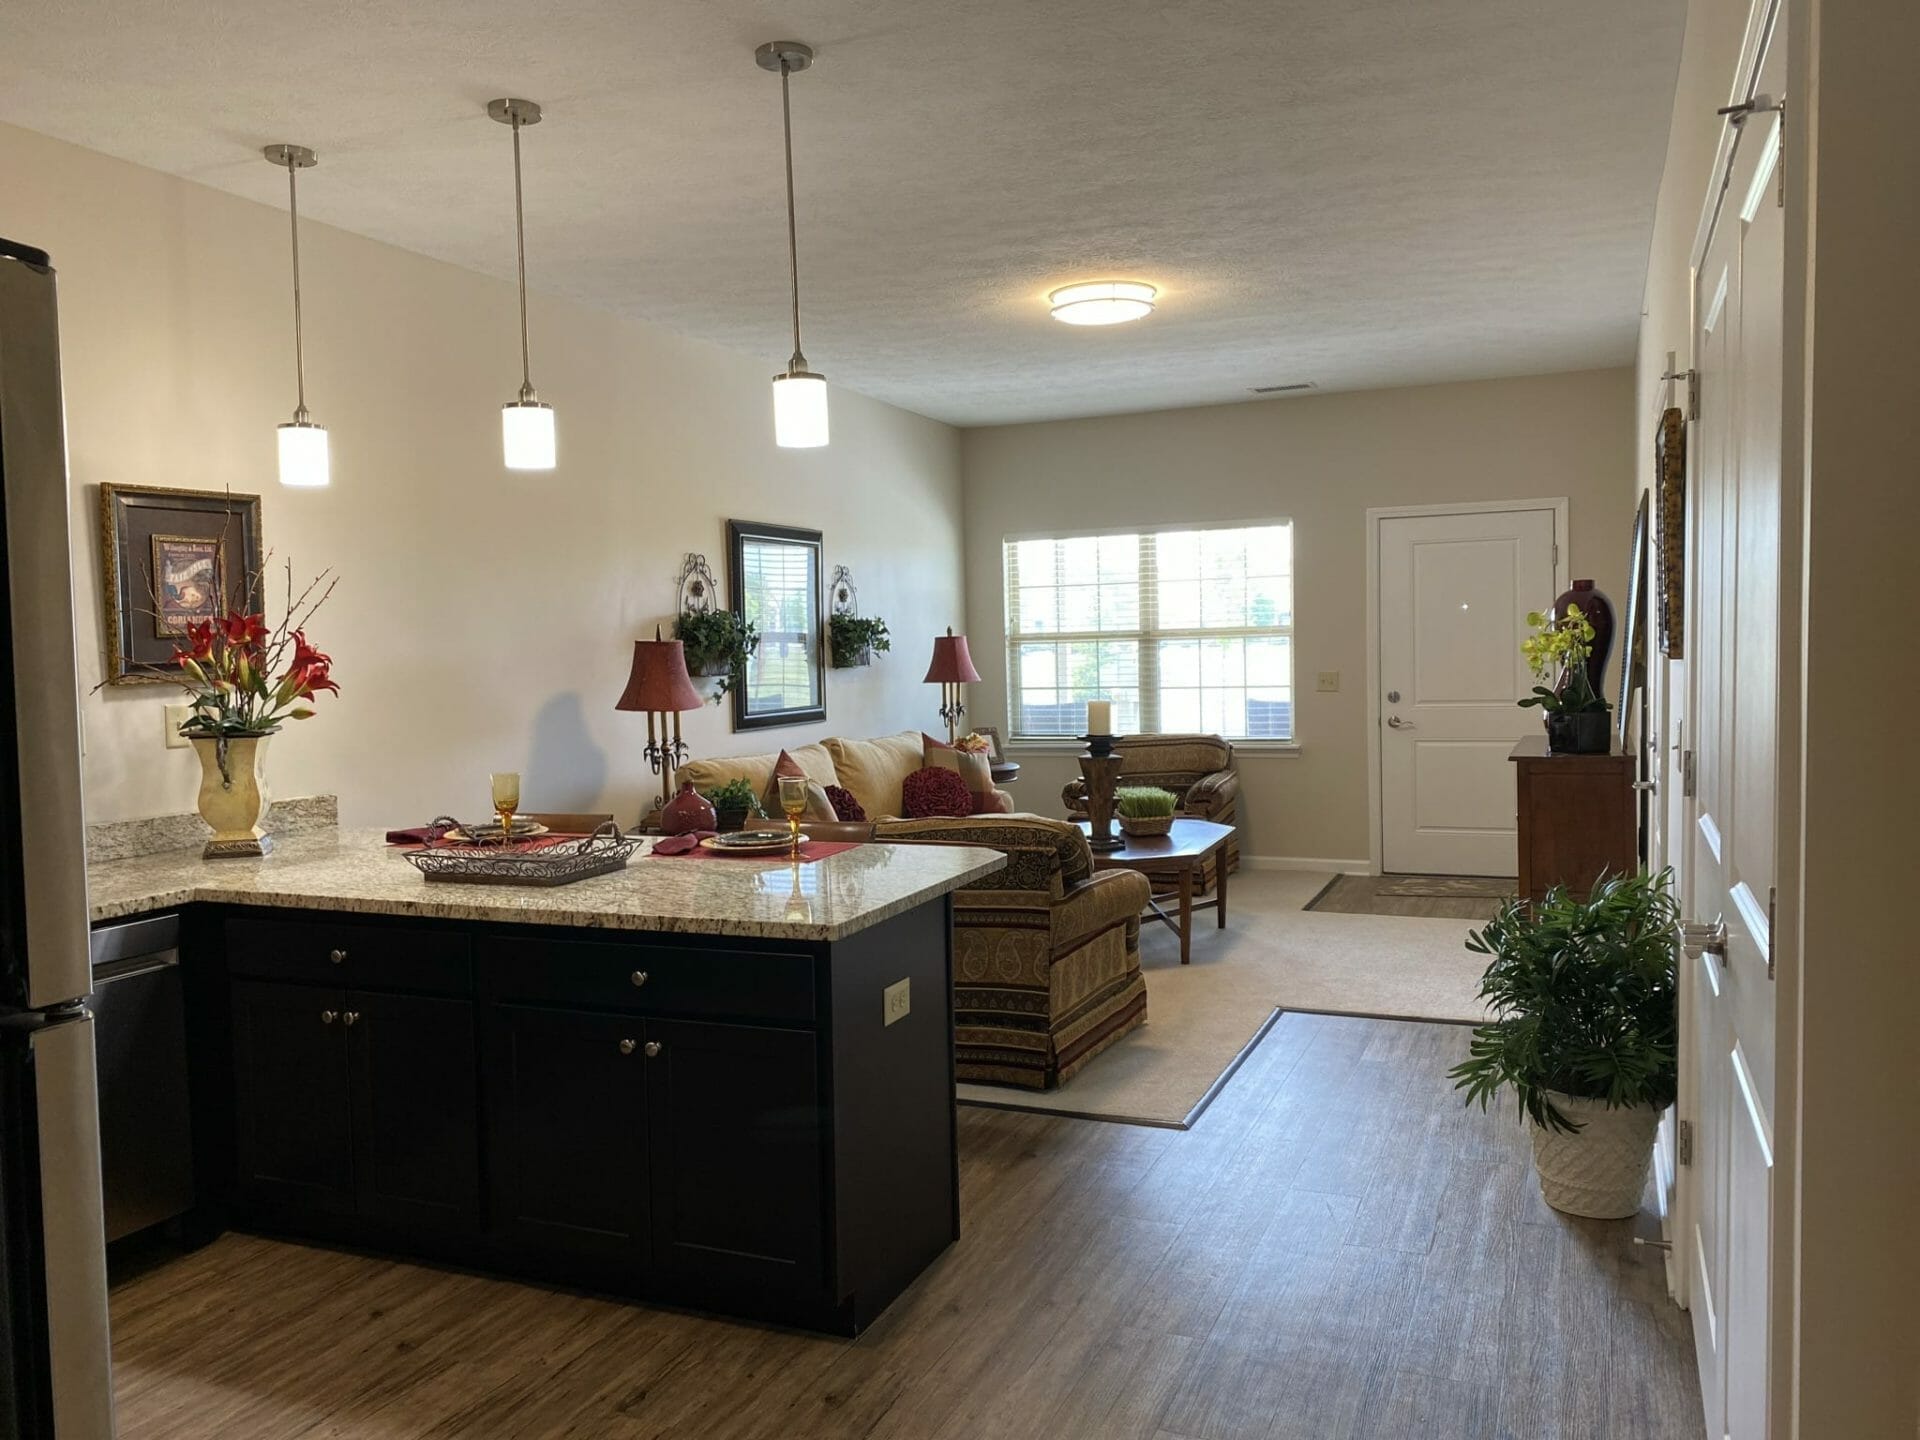 <span  class="uc_style_uc_tiles_grid_image_elementor_uc_items_attribute_title" style="color:#000000;">Aster Place Garden Home Kitchen with a view of the living room</span>